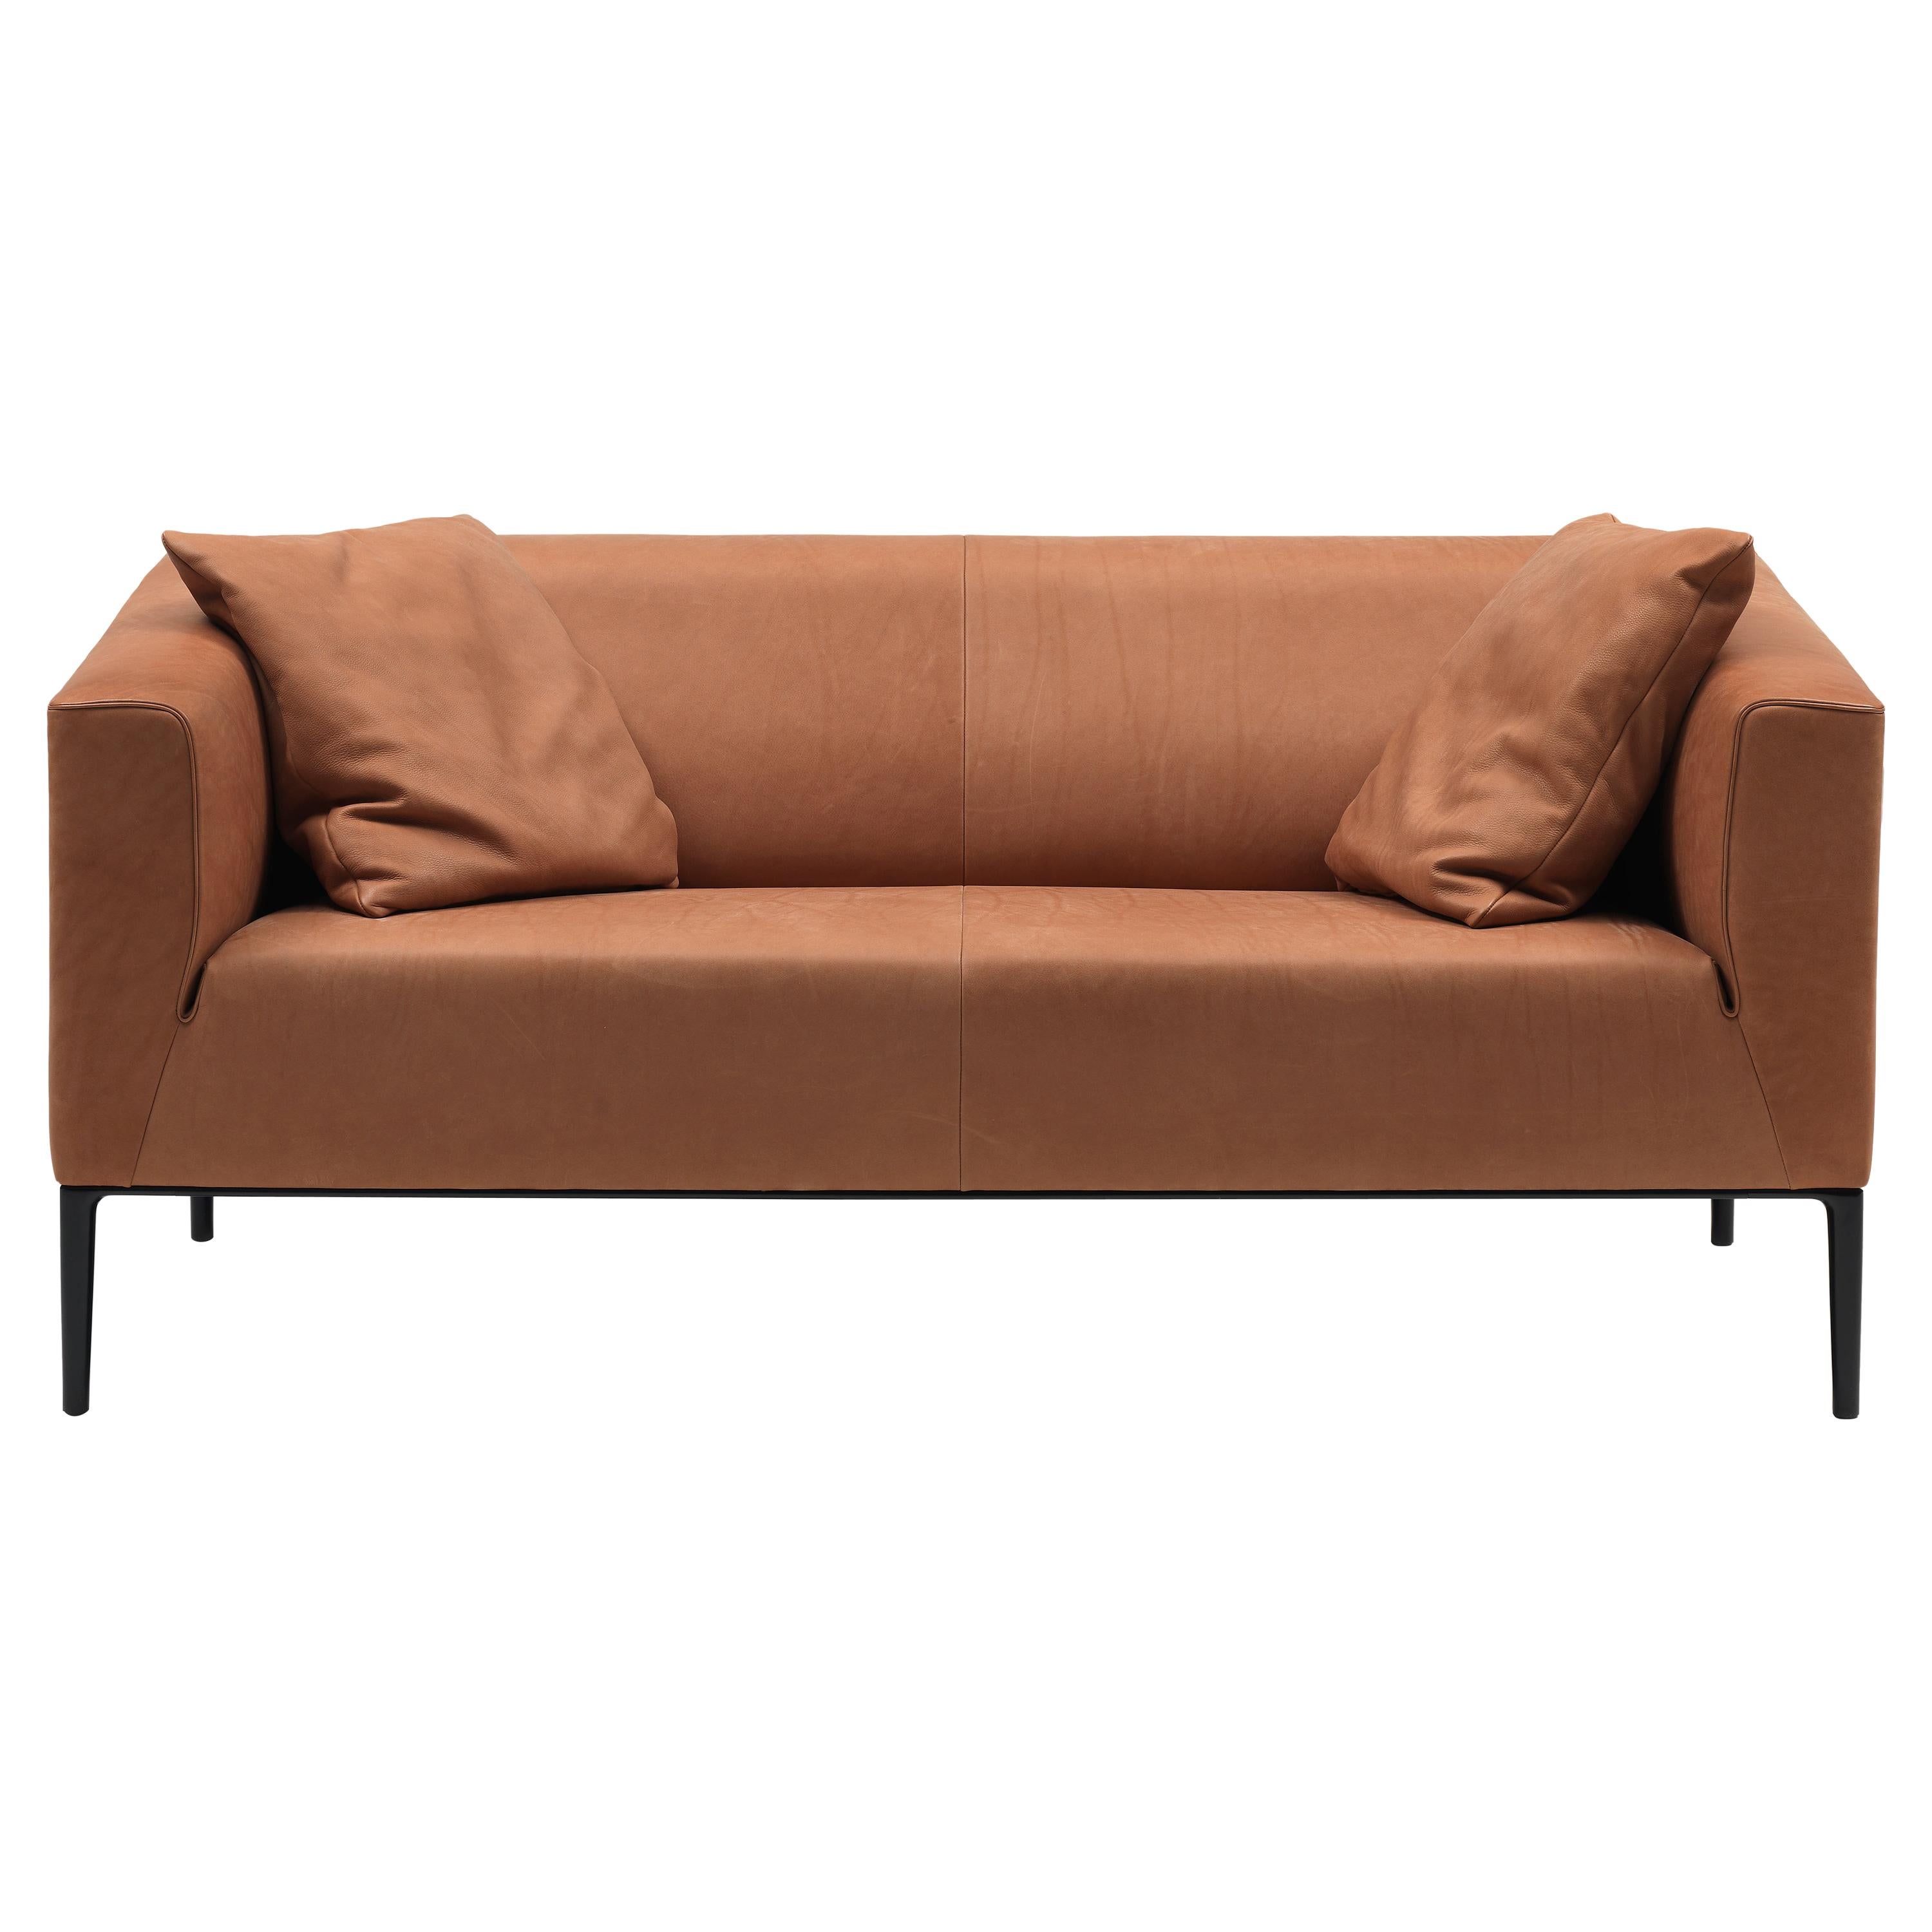 Set of DS-161 Sofa and 2 Cushions by De Sede For Sale